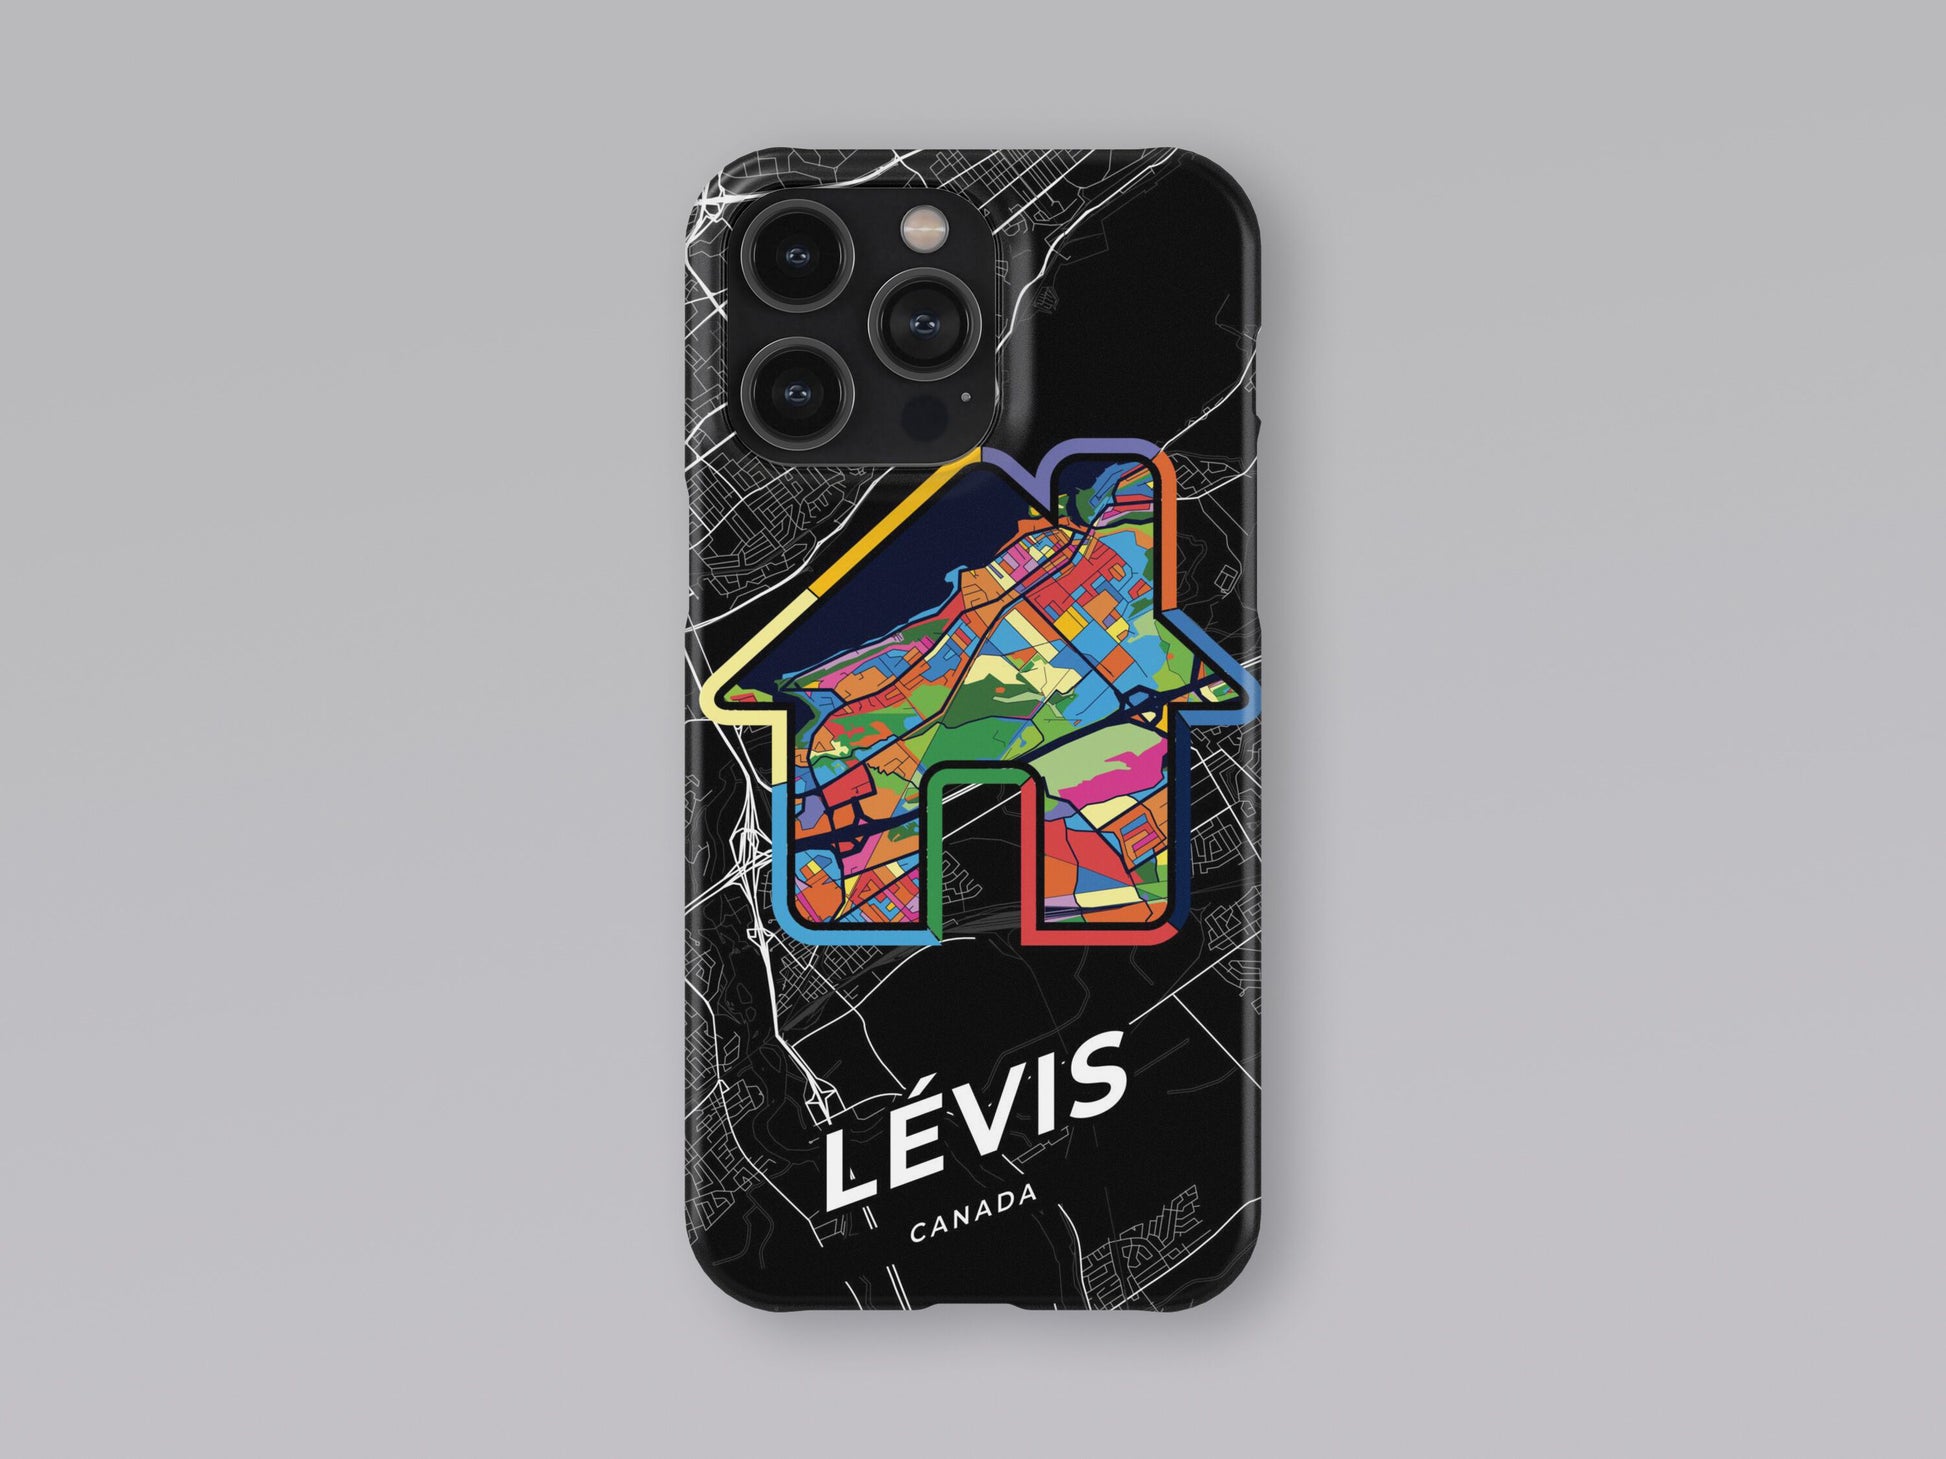 Lévis Canada slim phone case with colorful icon. Birthday, wedding or housewarming gift. Couple match cases. 3